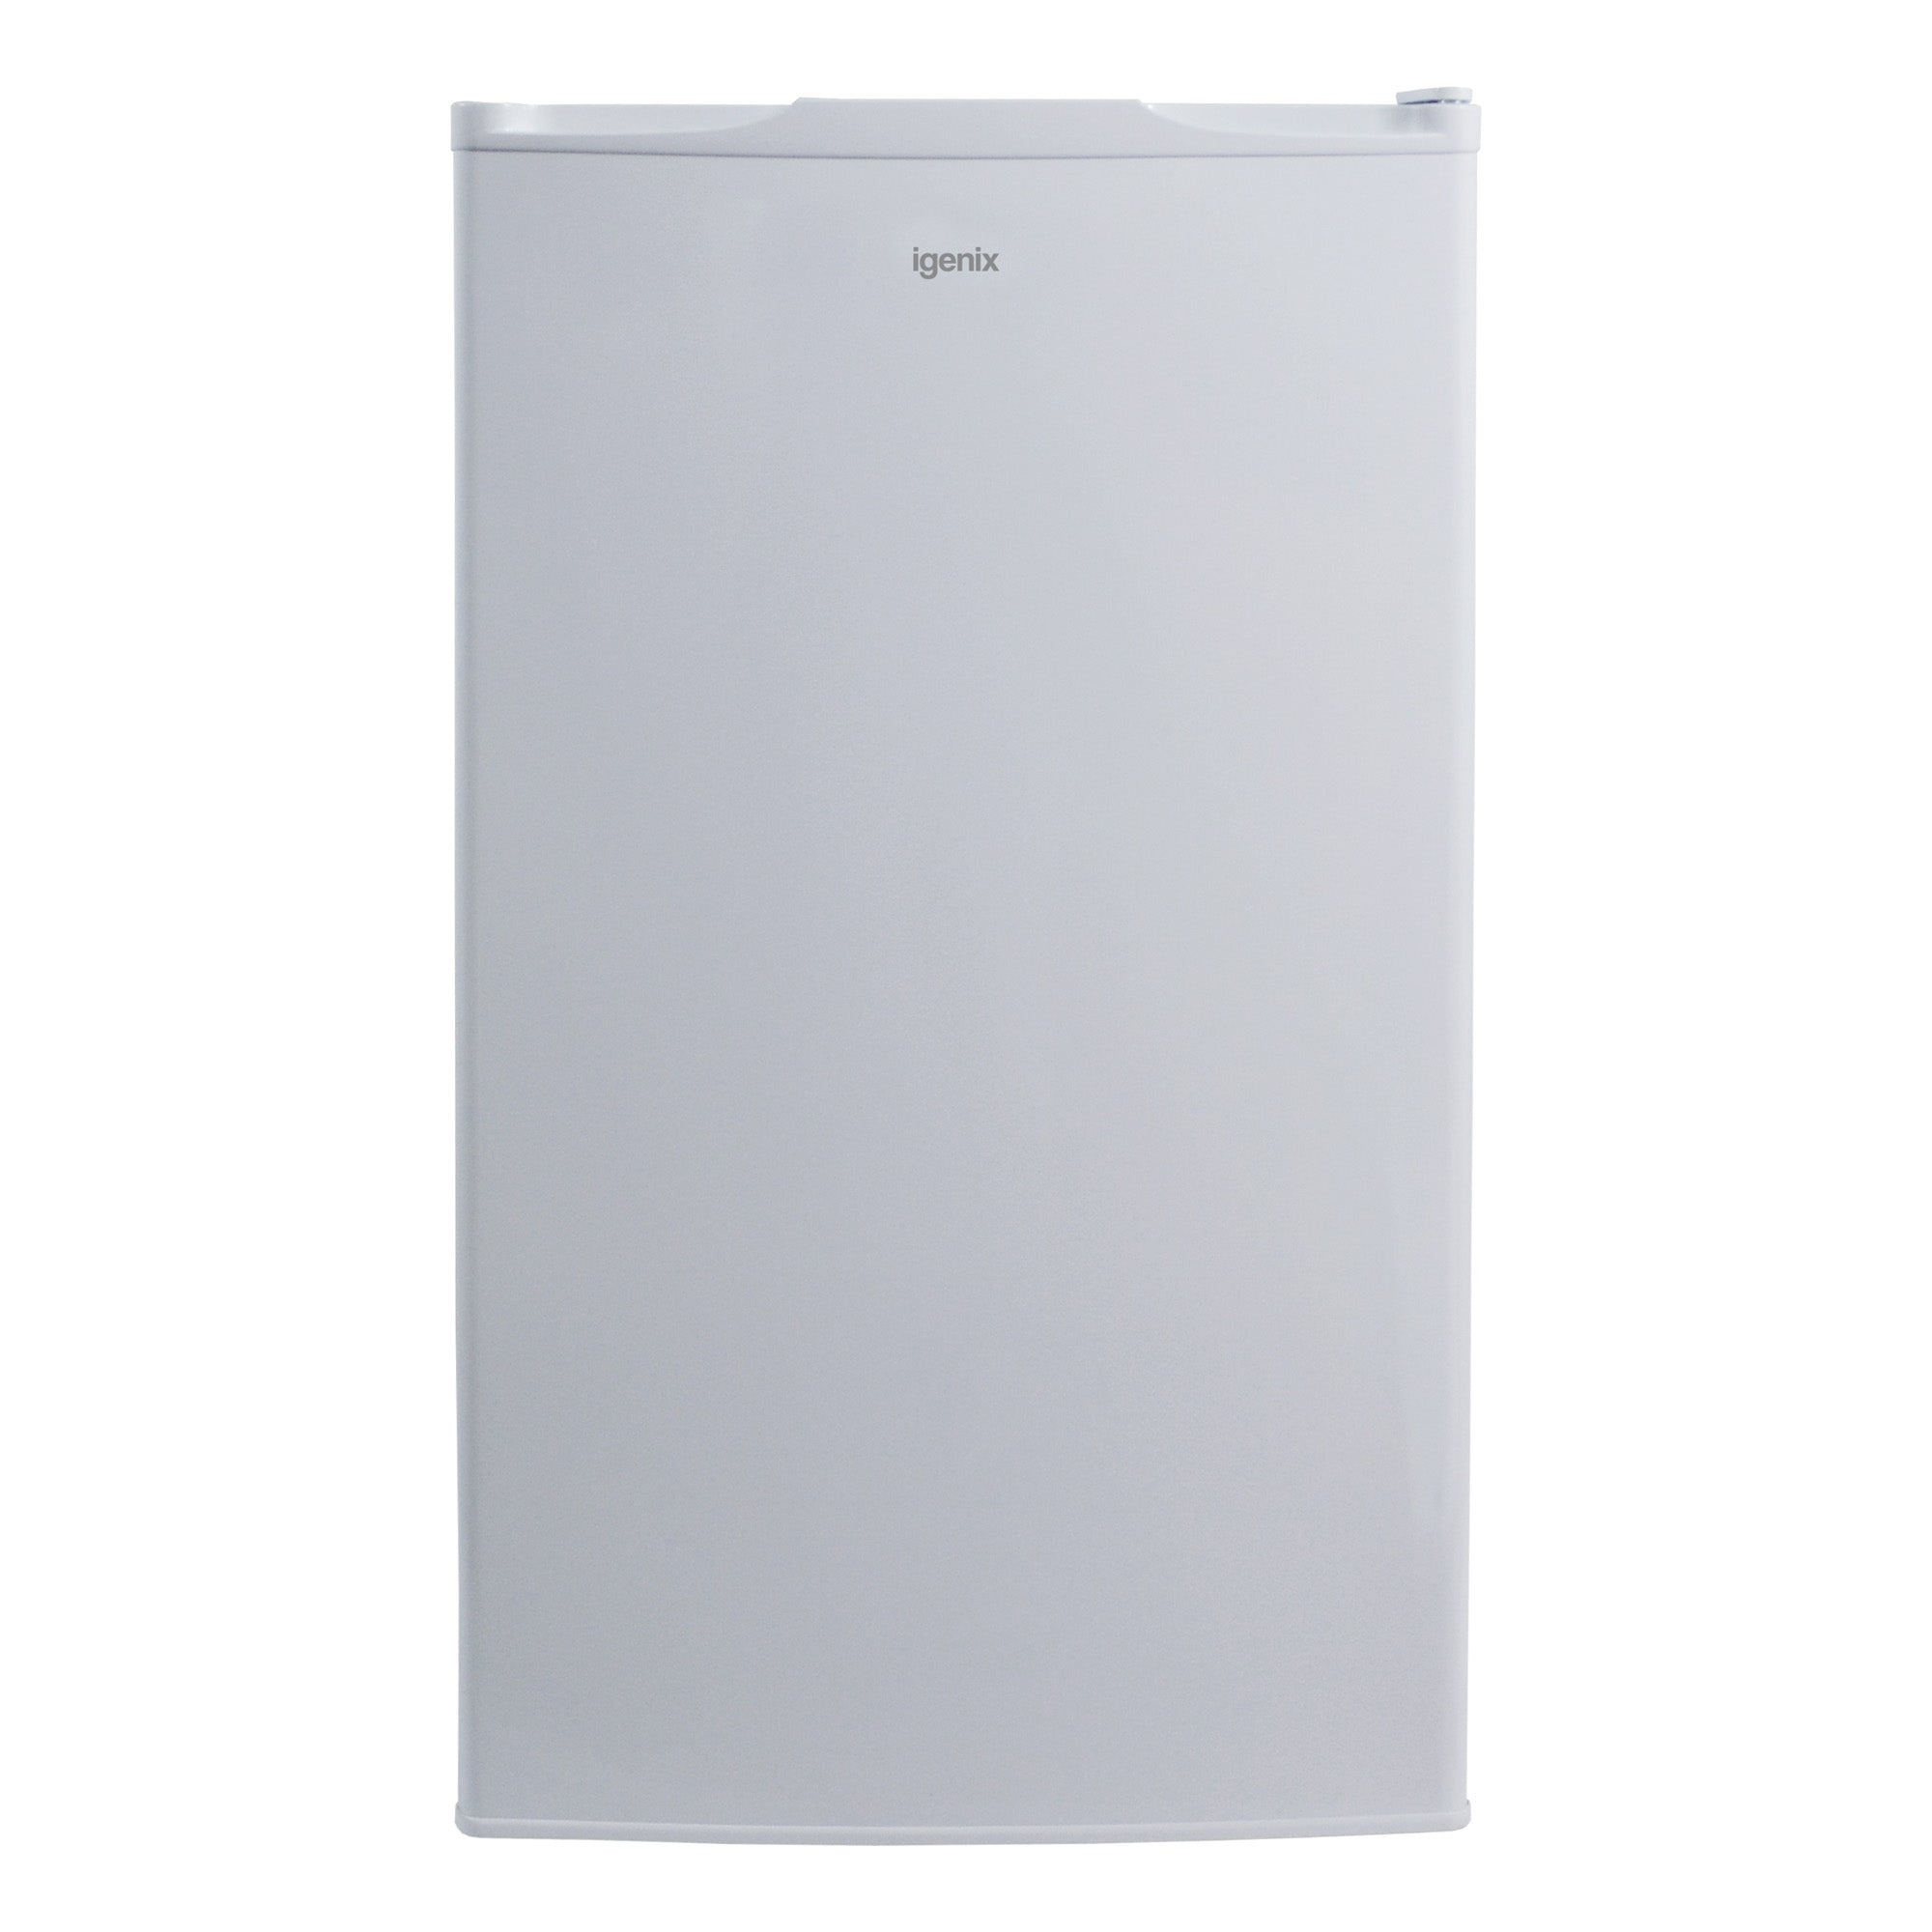 Under Counter Fridge with Ice Box, 80 Litre, White